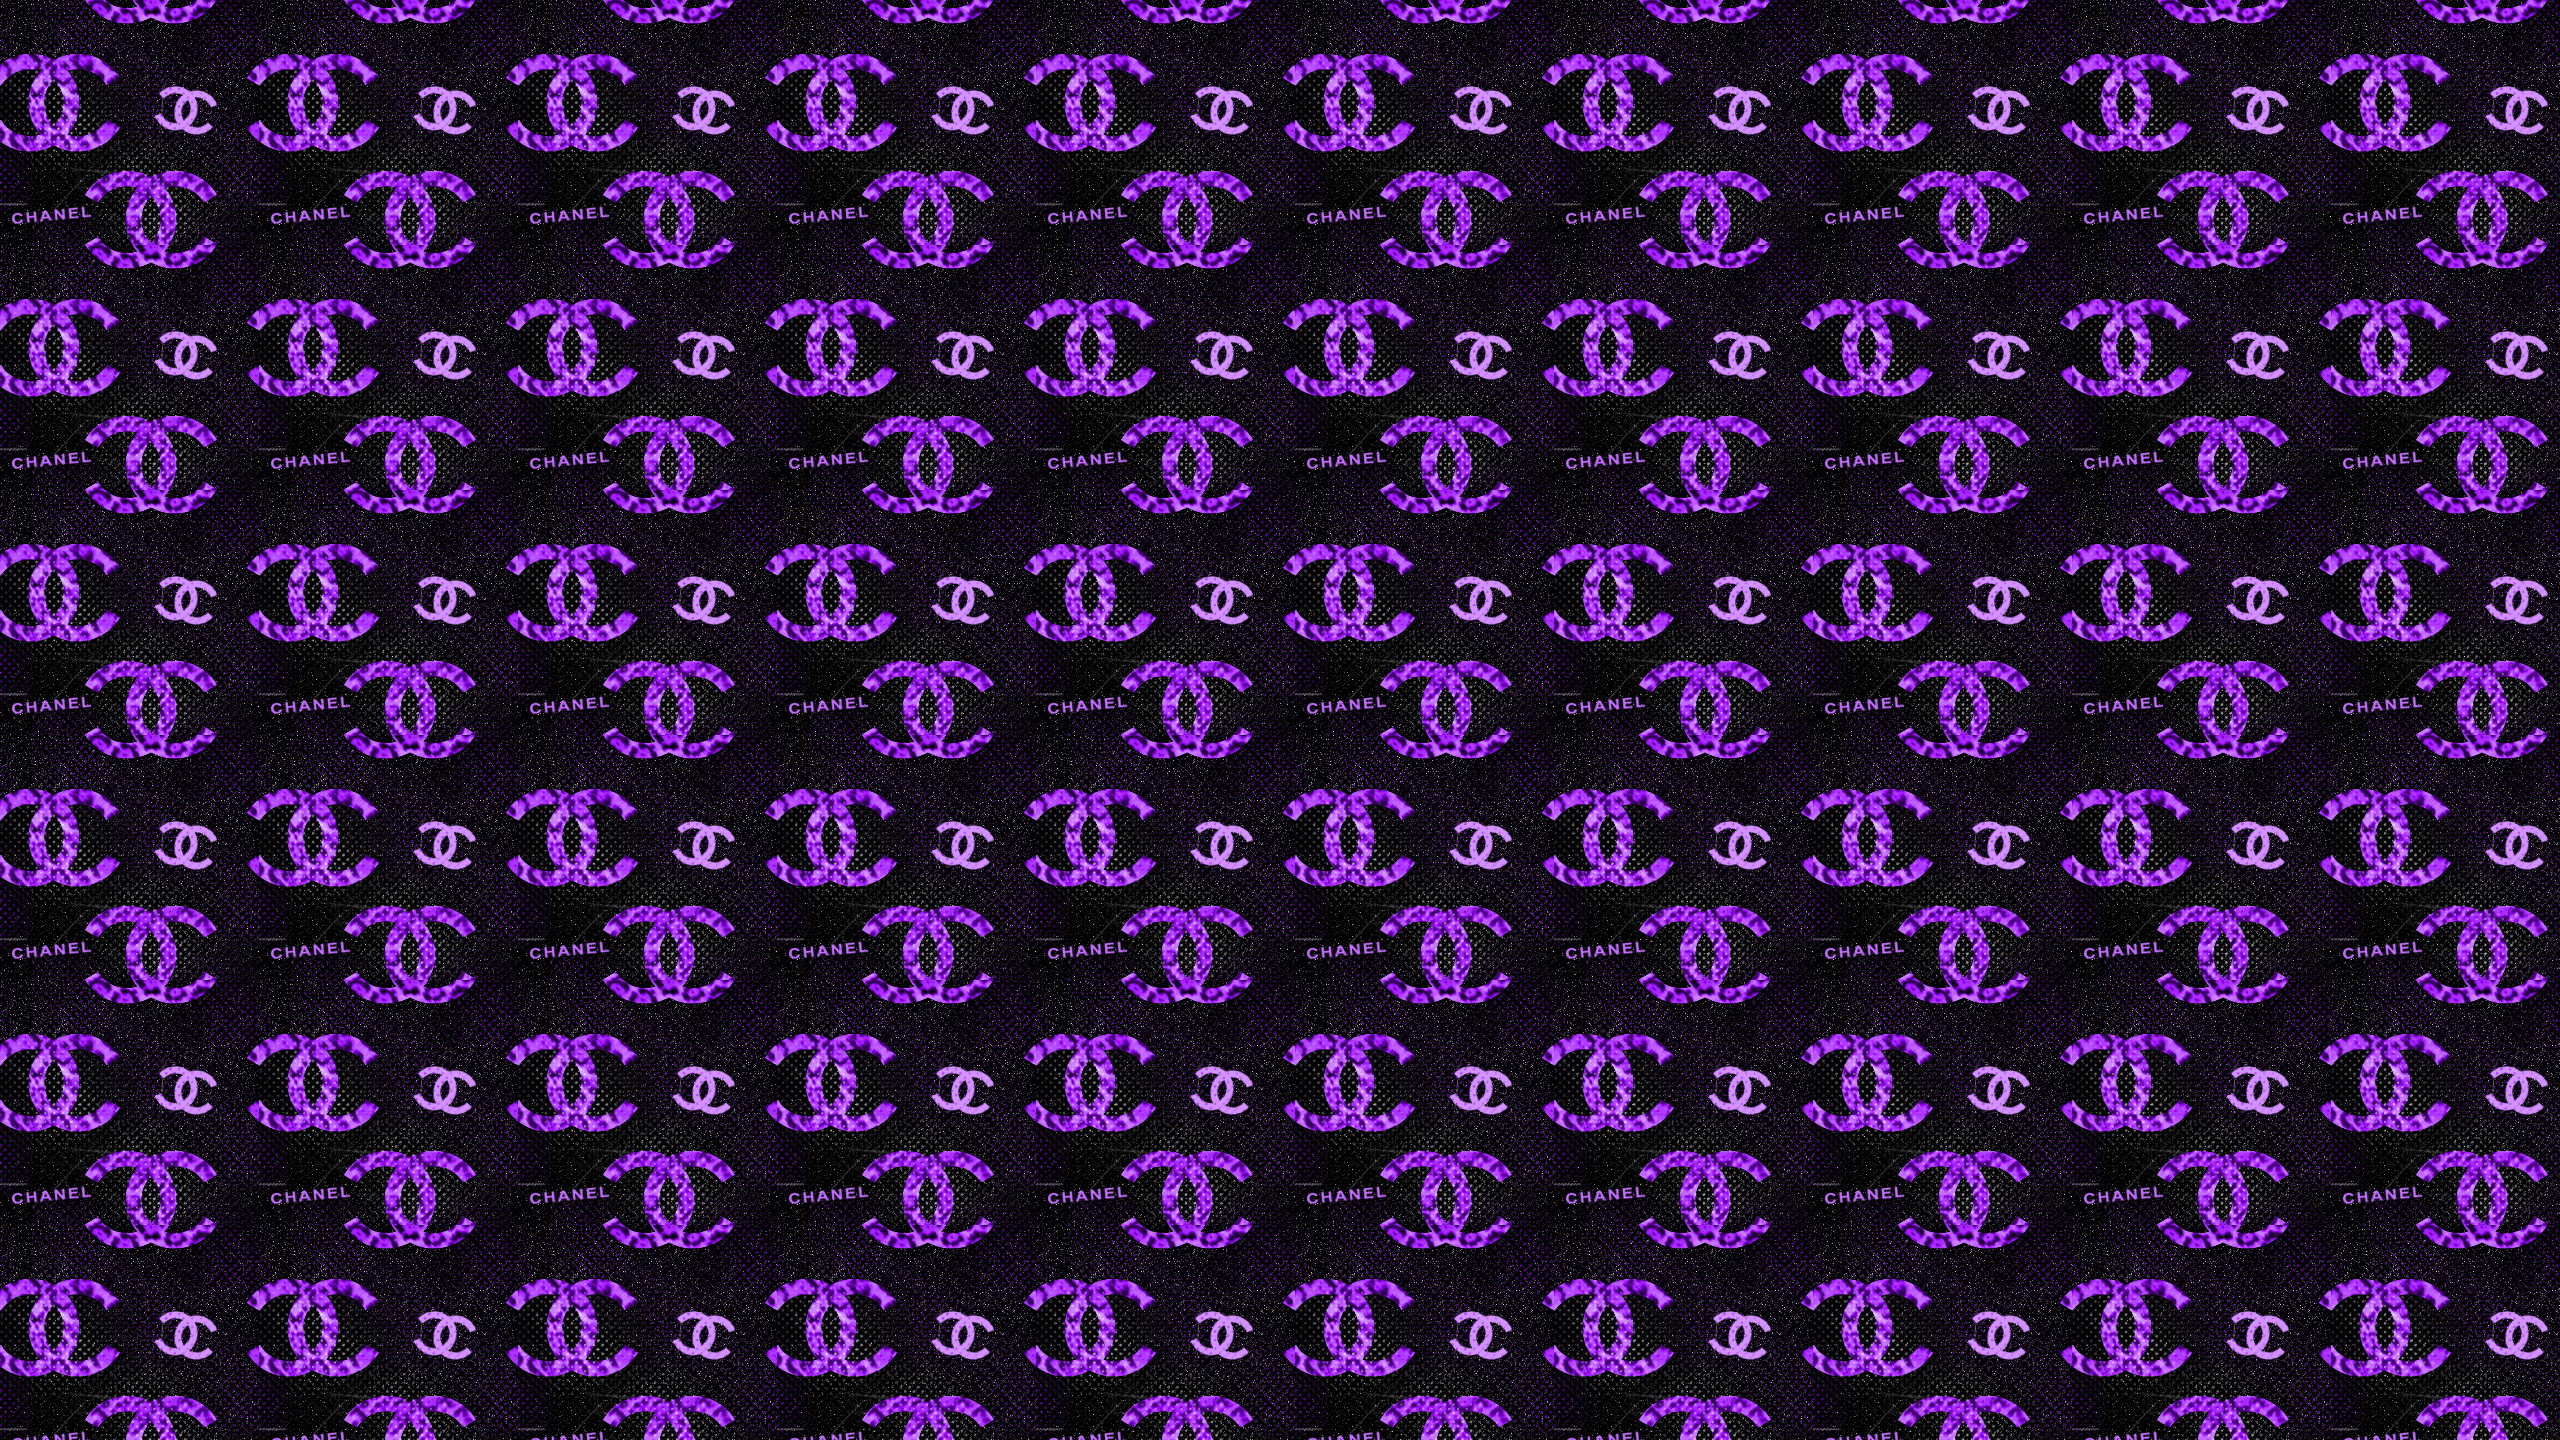 2560x1440 Chanel-wallpapers-HD-backgrounds-purple